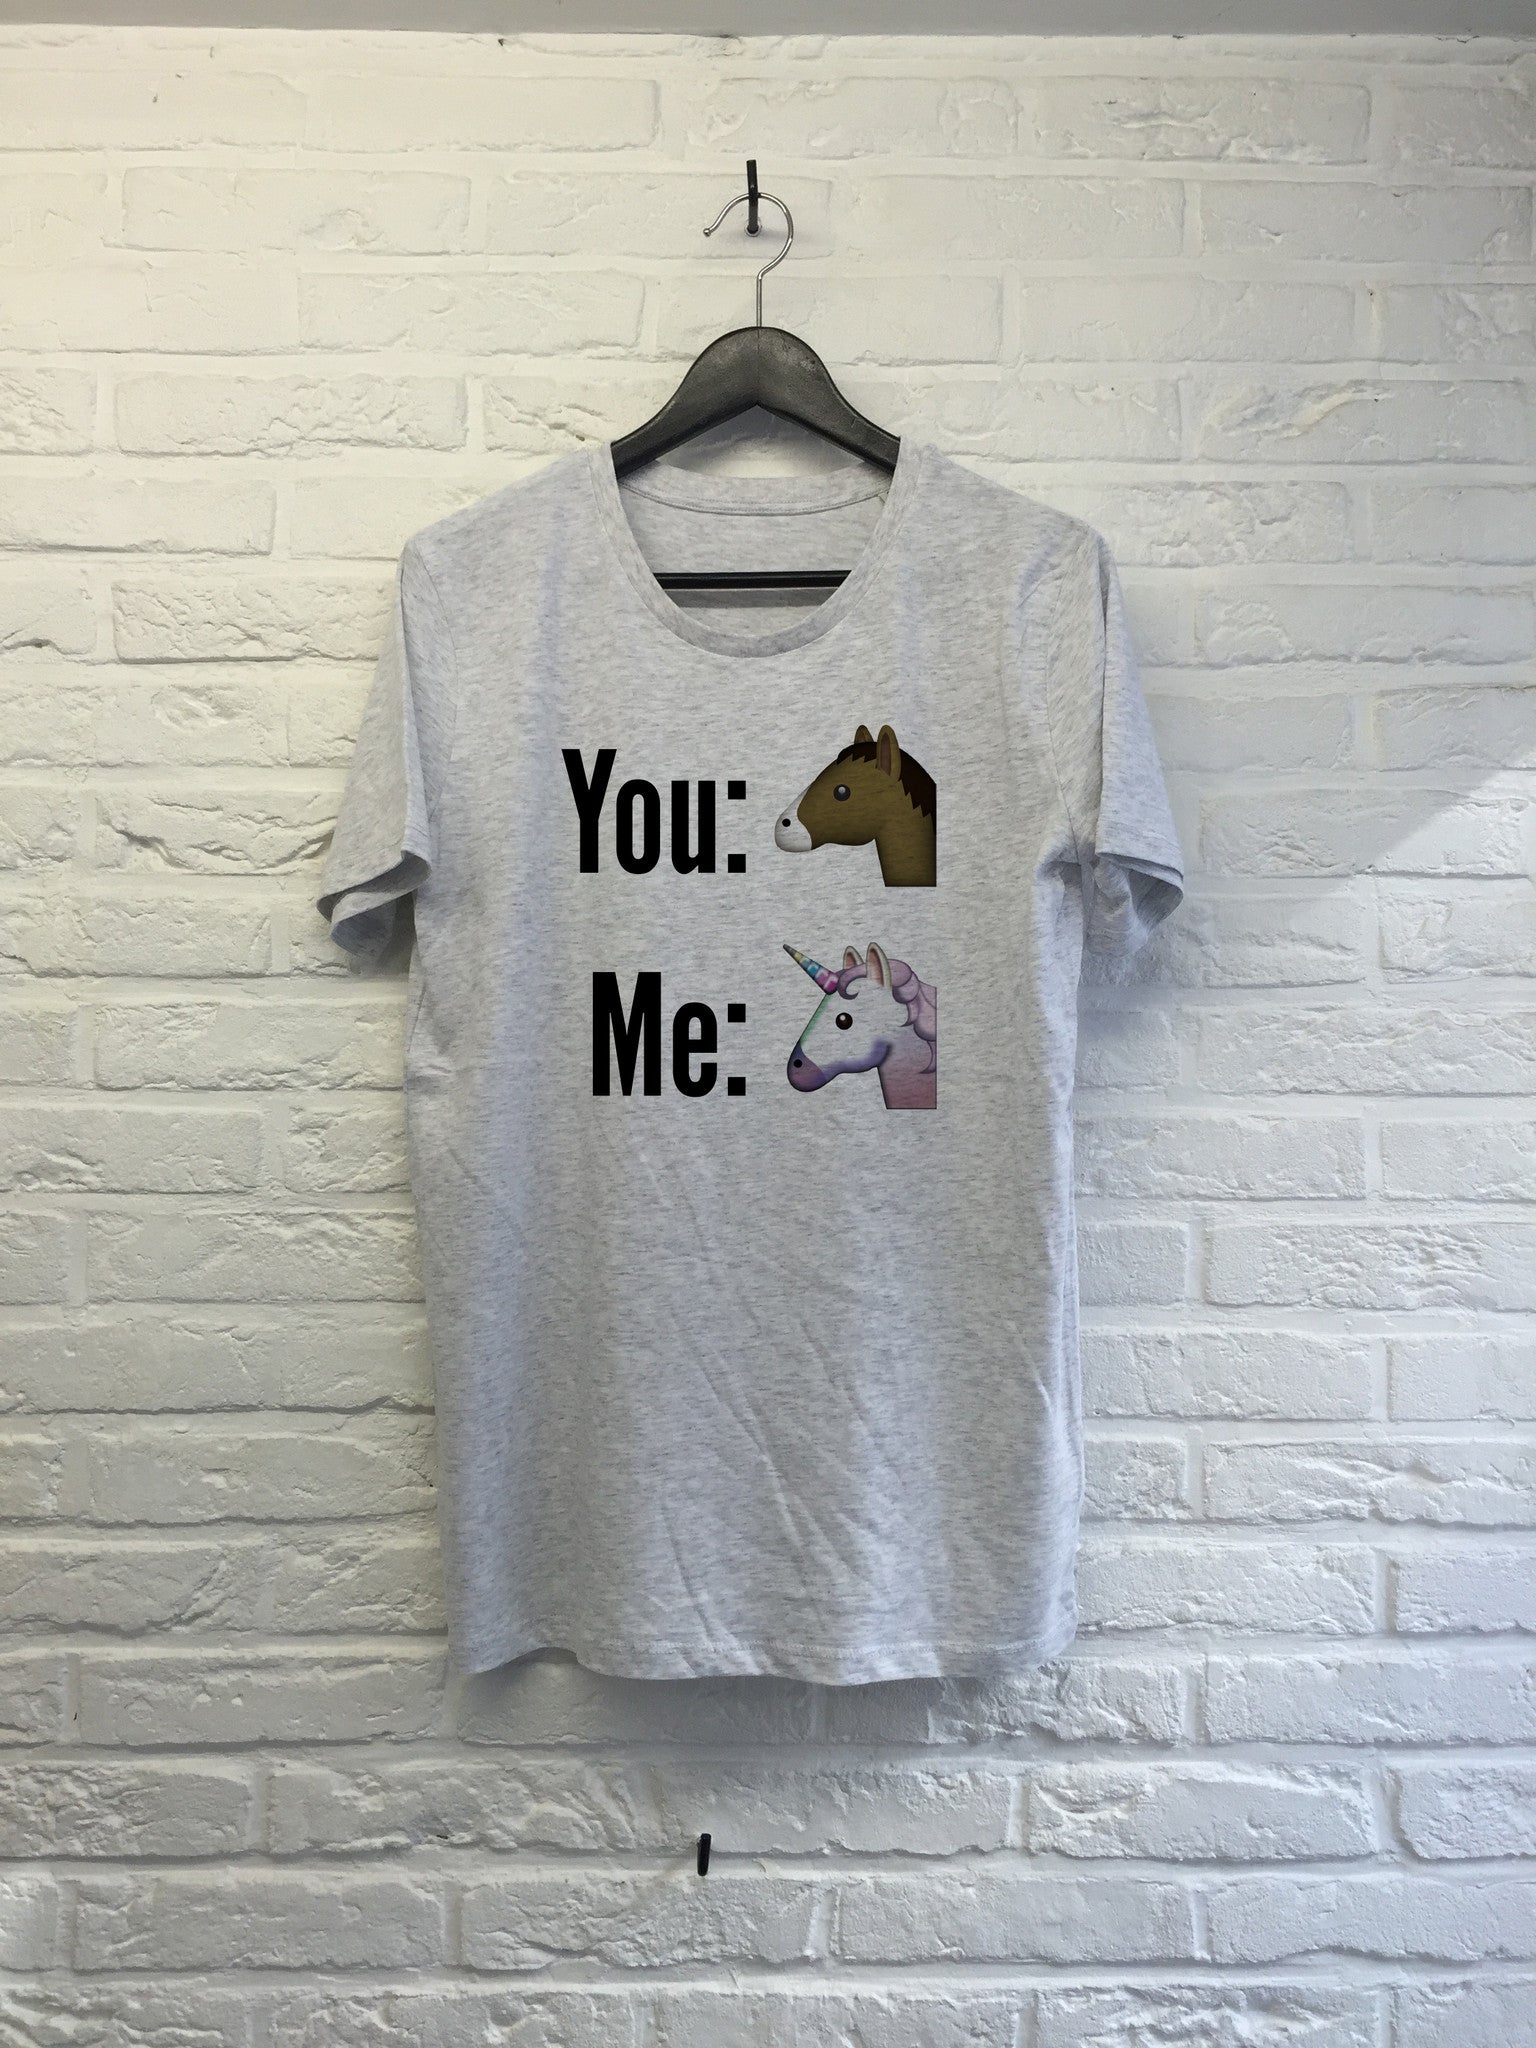 You and Me-T shirt-Atelier Amelot